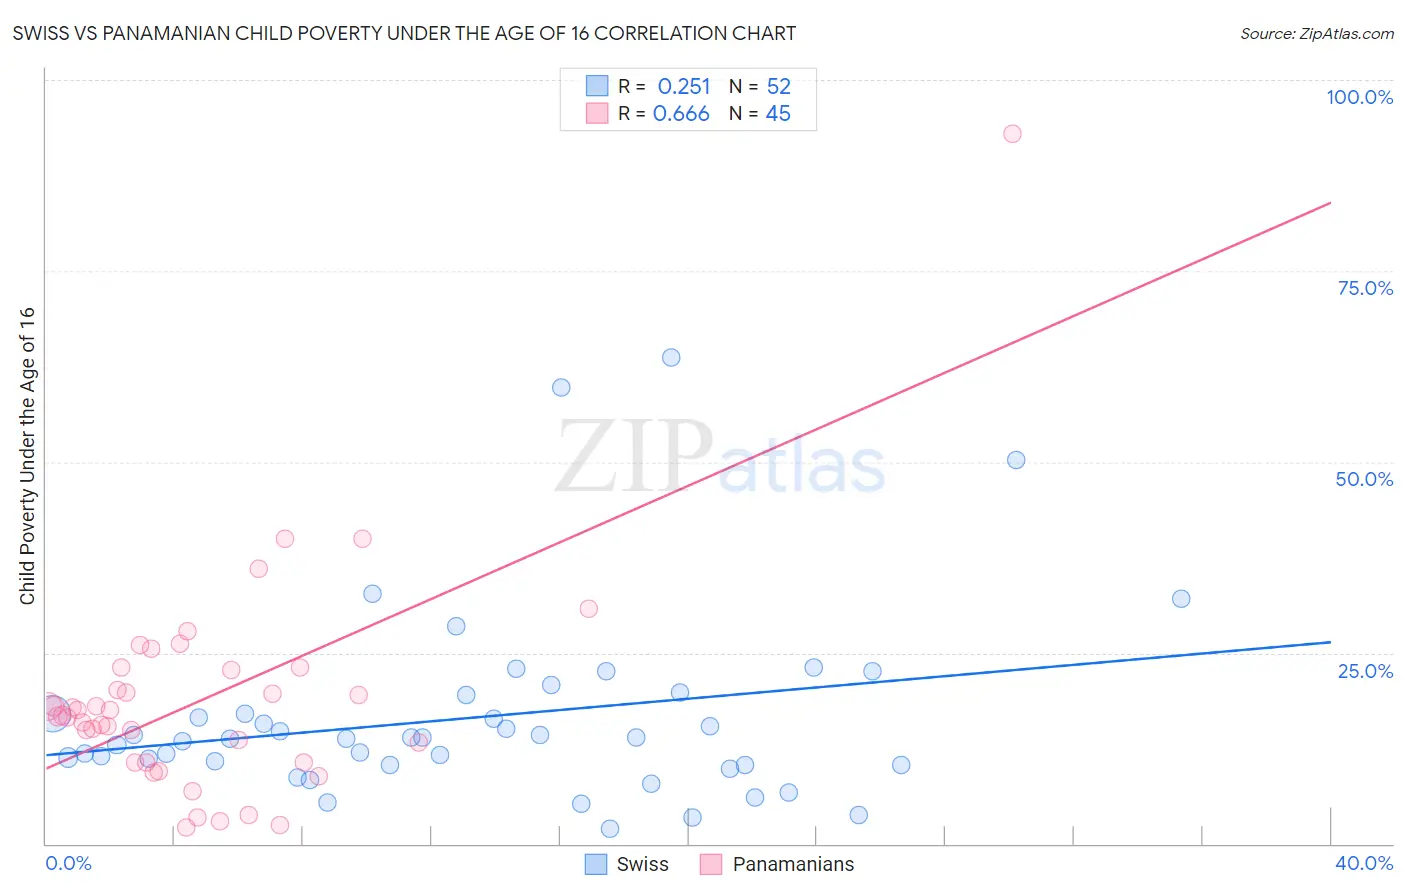 Swiss vs Panamanian Child Poverty Under the Age of 16